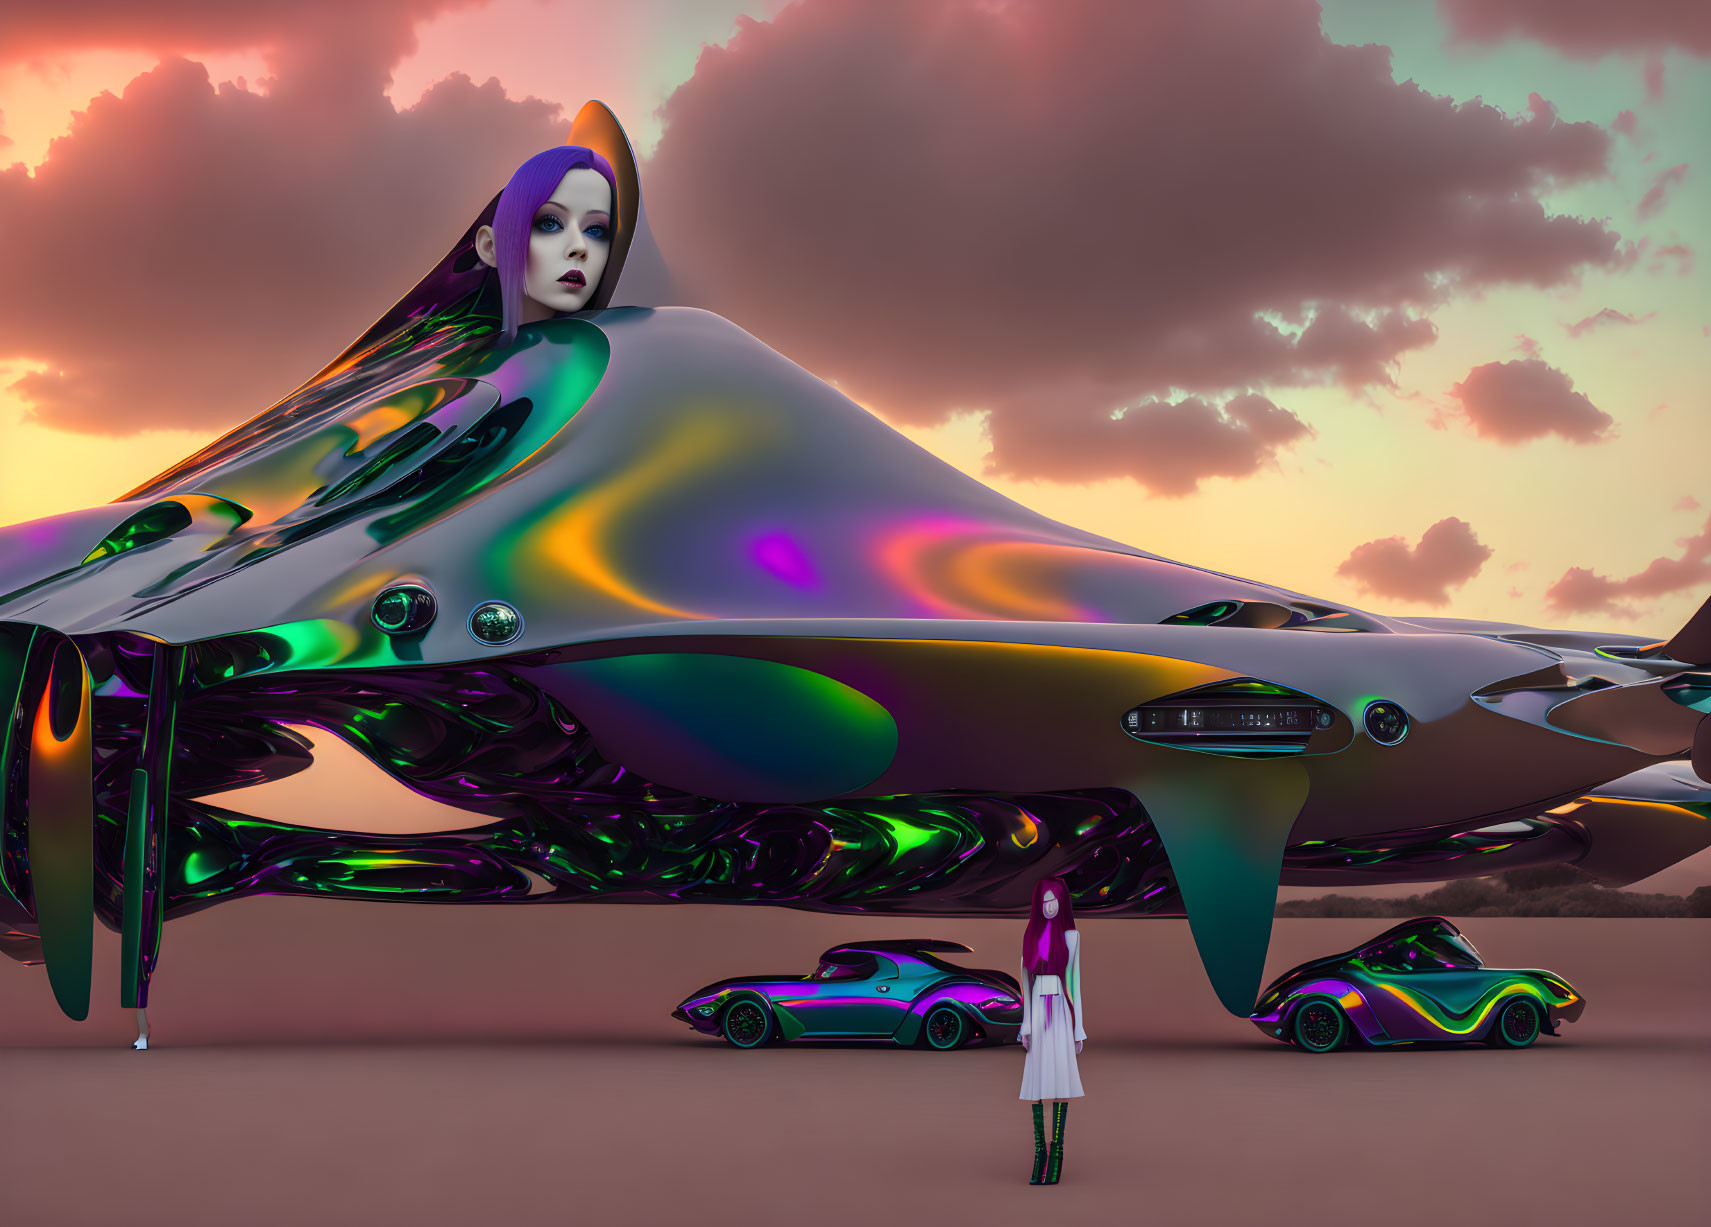 Surreal futuristic scene with giant humanoid face, spaceship, cars, woman, and pink sky